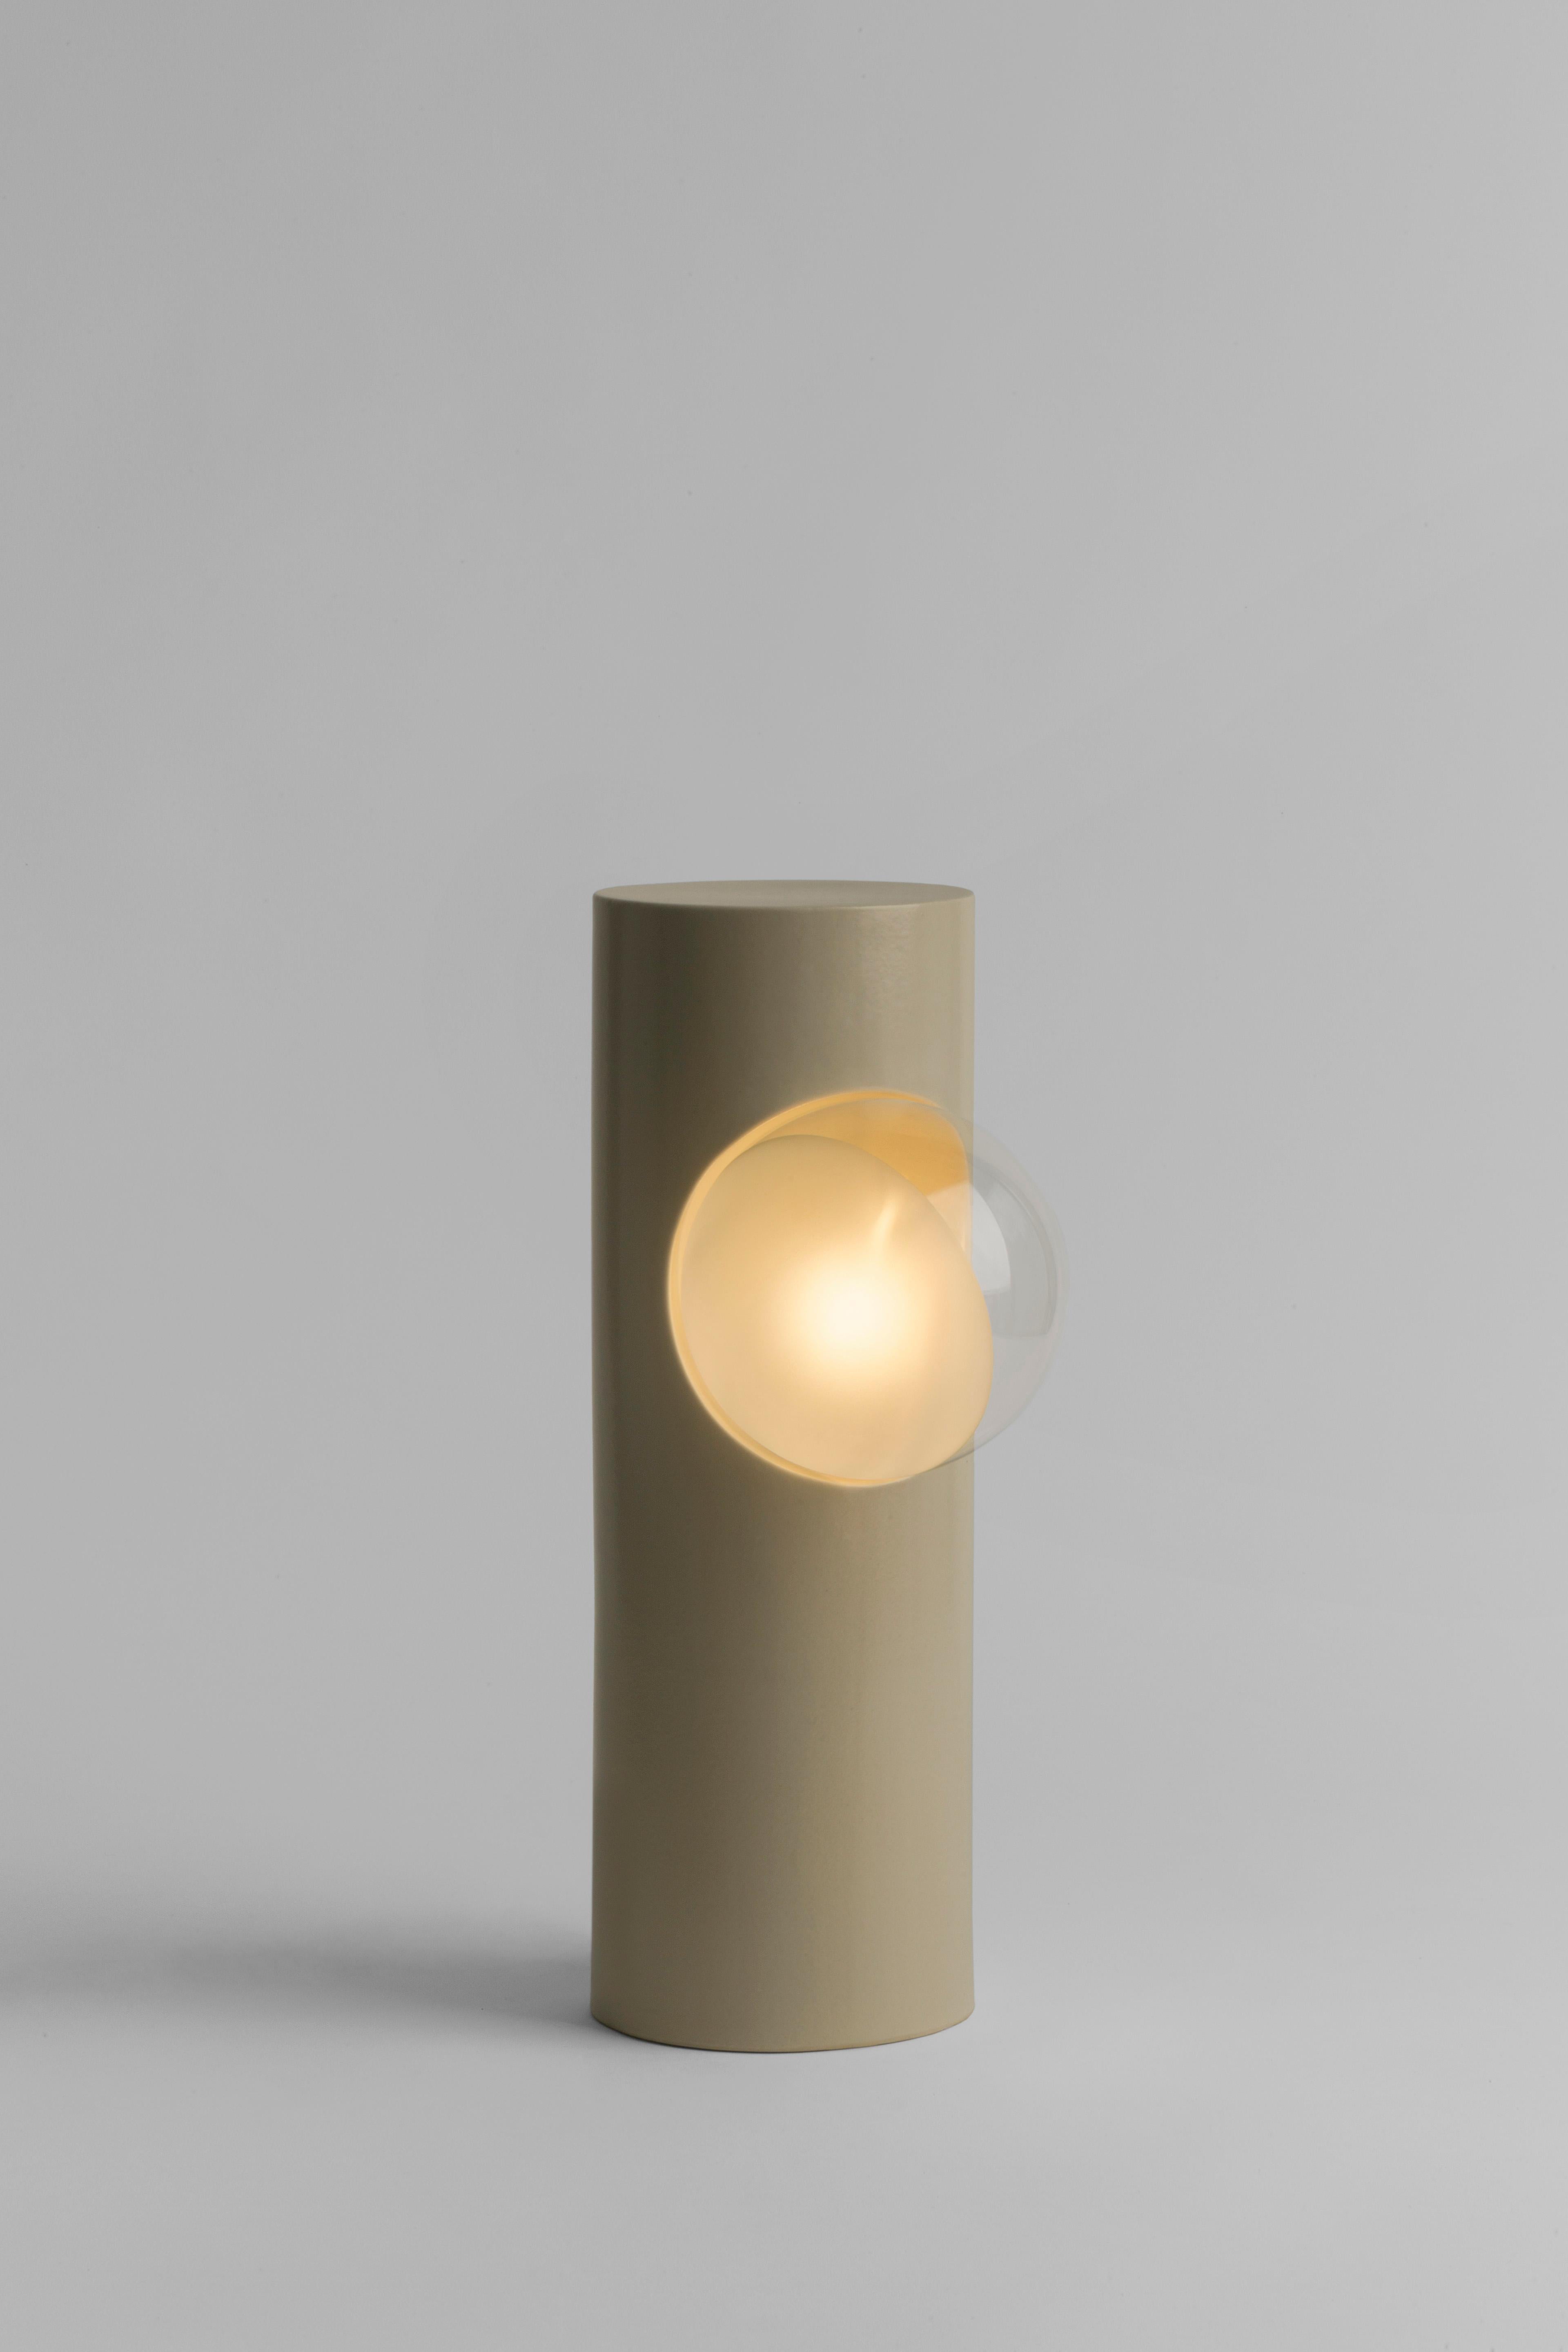 Ecru Semigloss Post Lamp by Subject Bureaux
DImensions: ? 12.7 x H 38 cm
Materials: Handmade Slip Cast Stoneware, Glass.

The Post Lamp was derived from the exercise of consistently being aware of ones environment. By being curious of the things